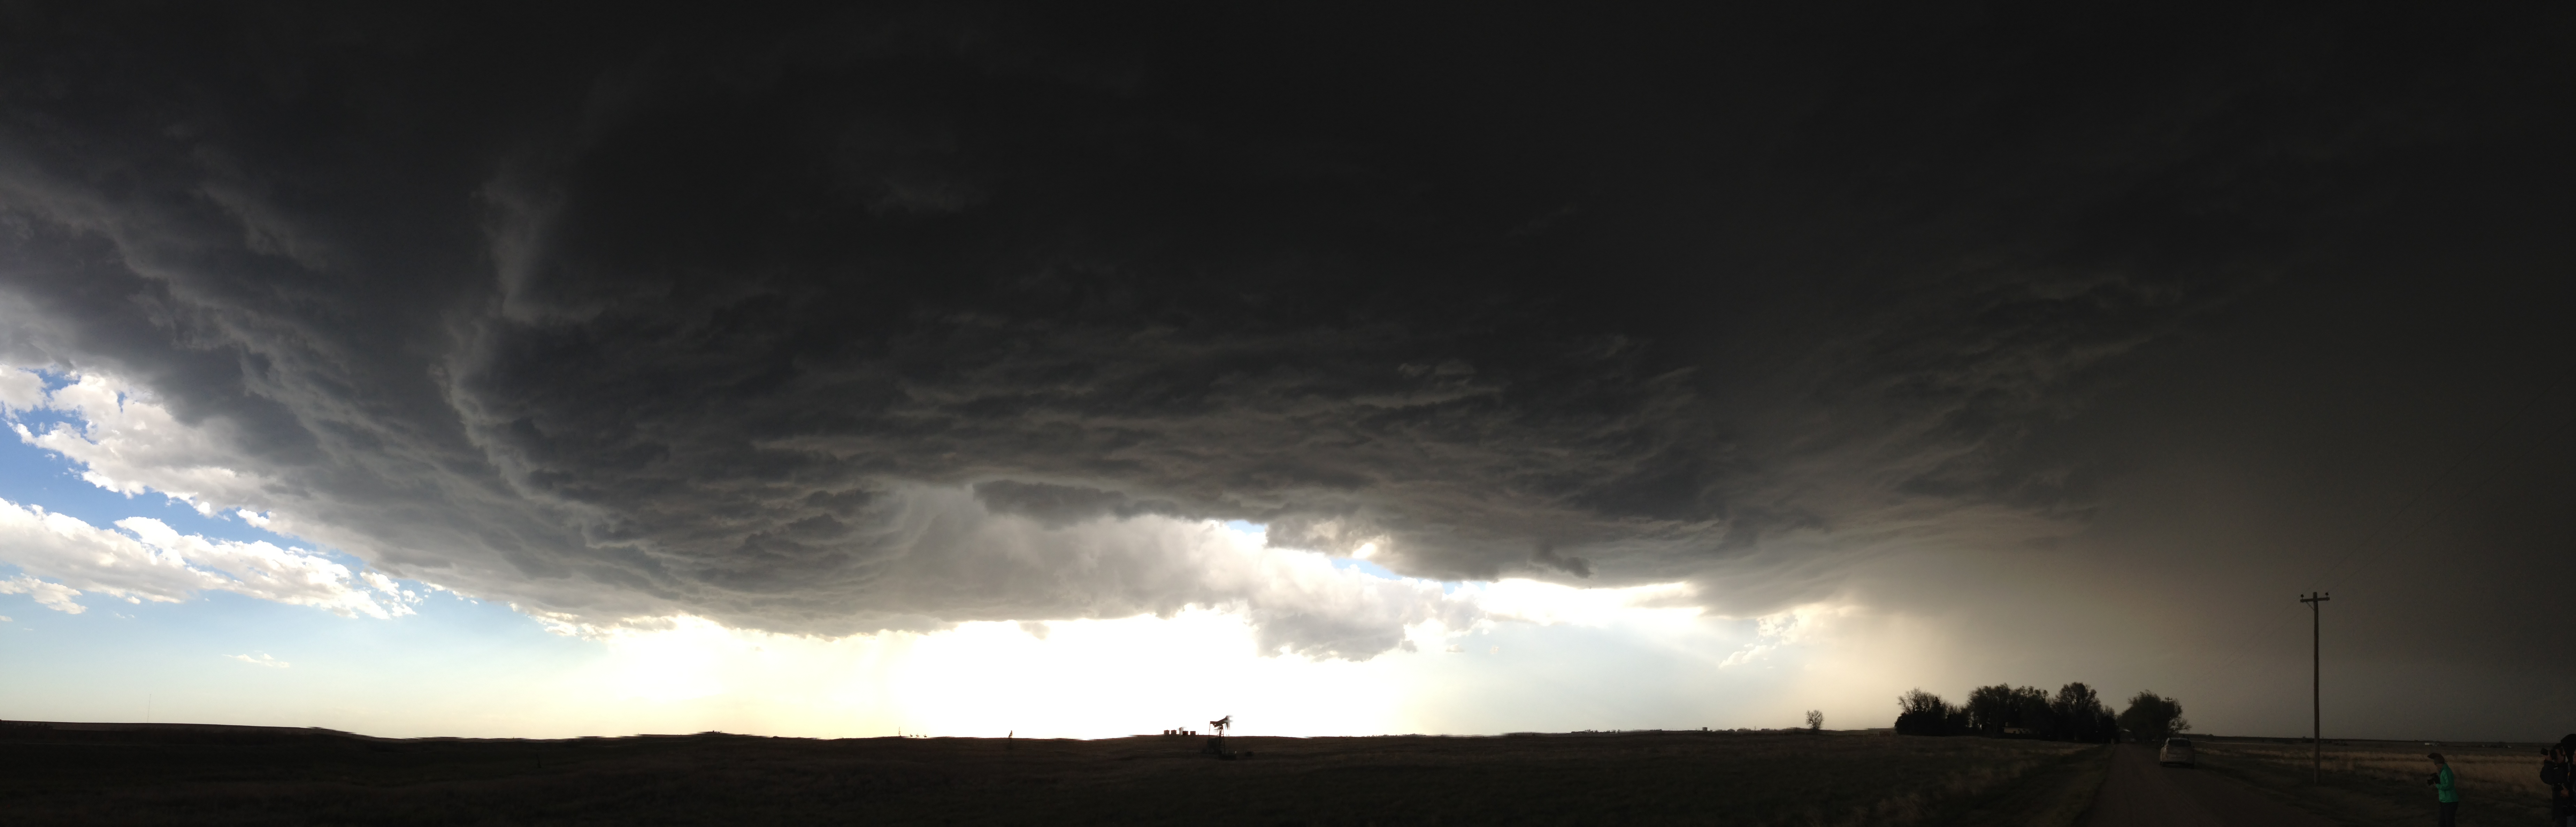 Why you need to bring your iPhone on your storm chasing trip